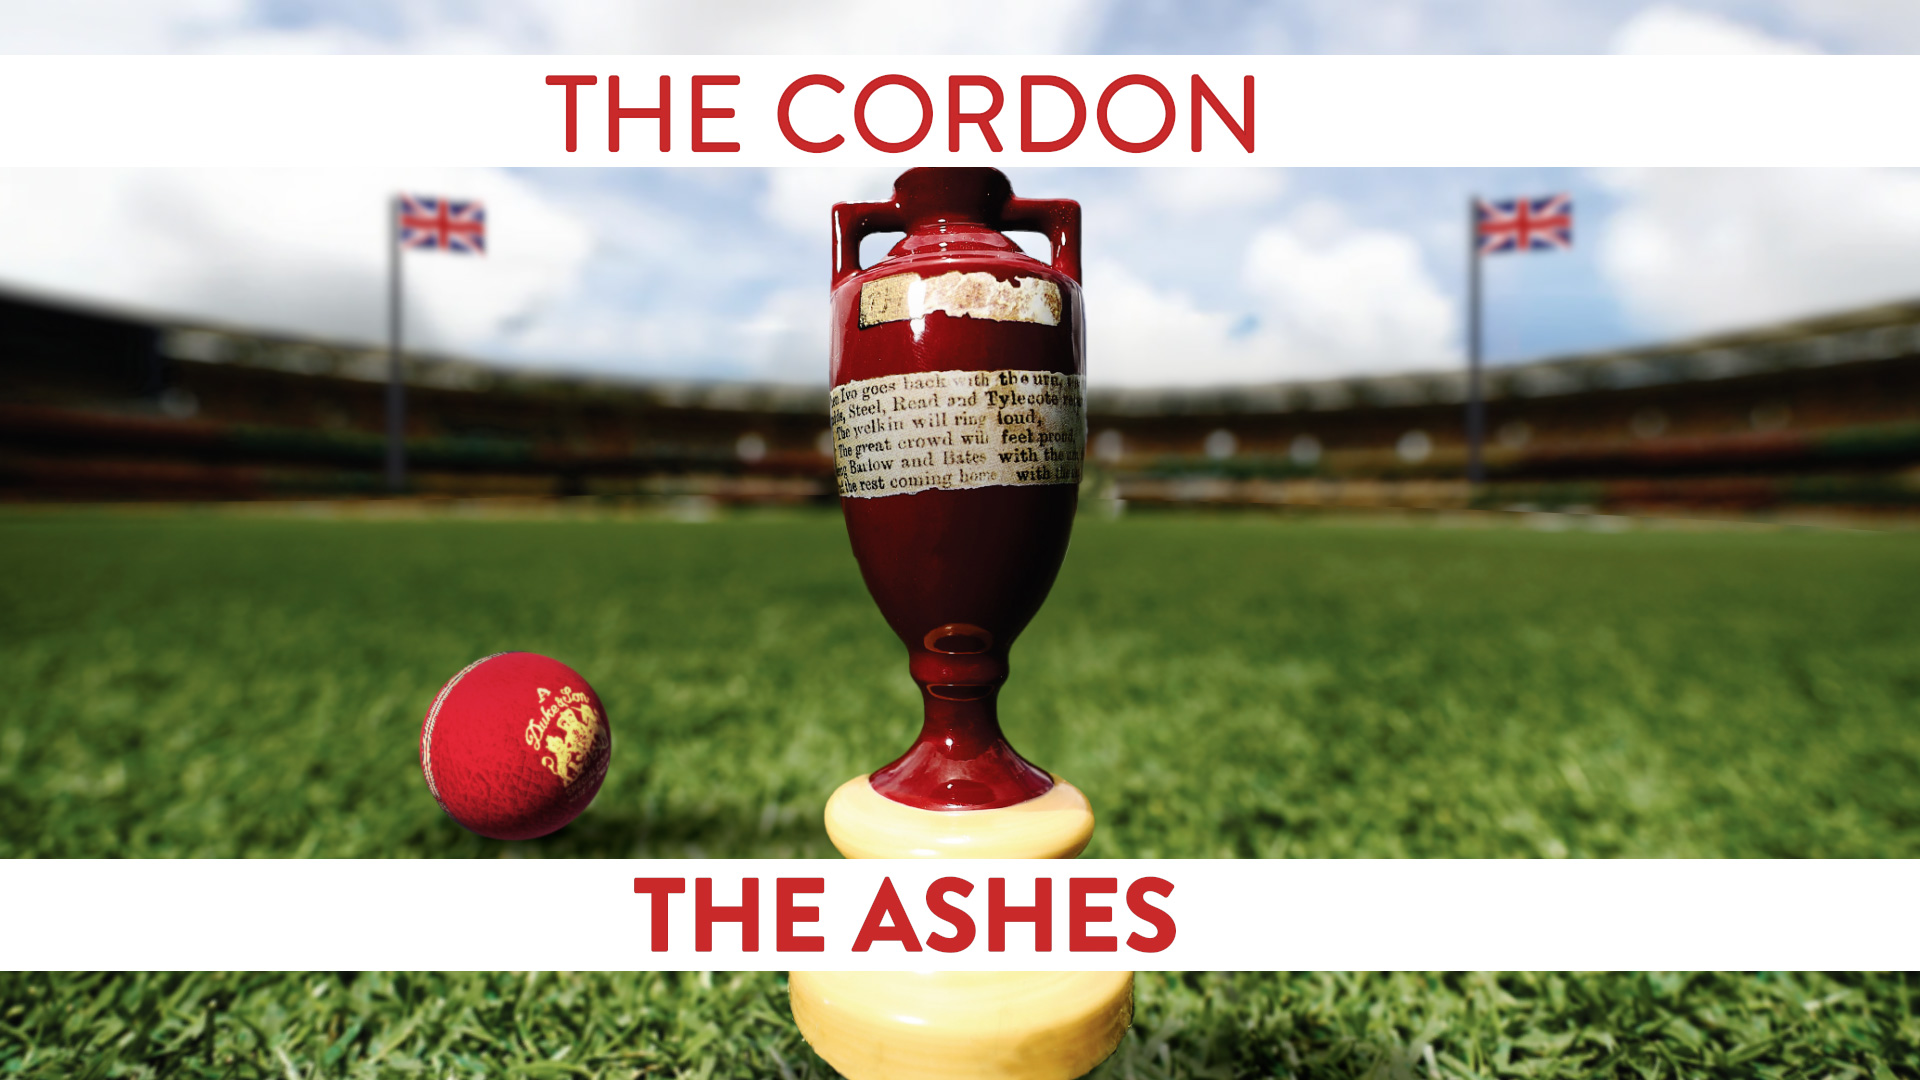 The Cordon - Ashes Test 1 Review